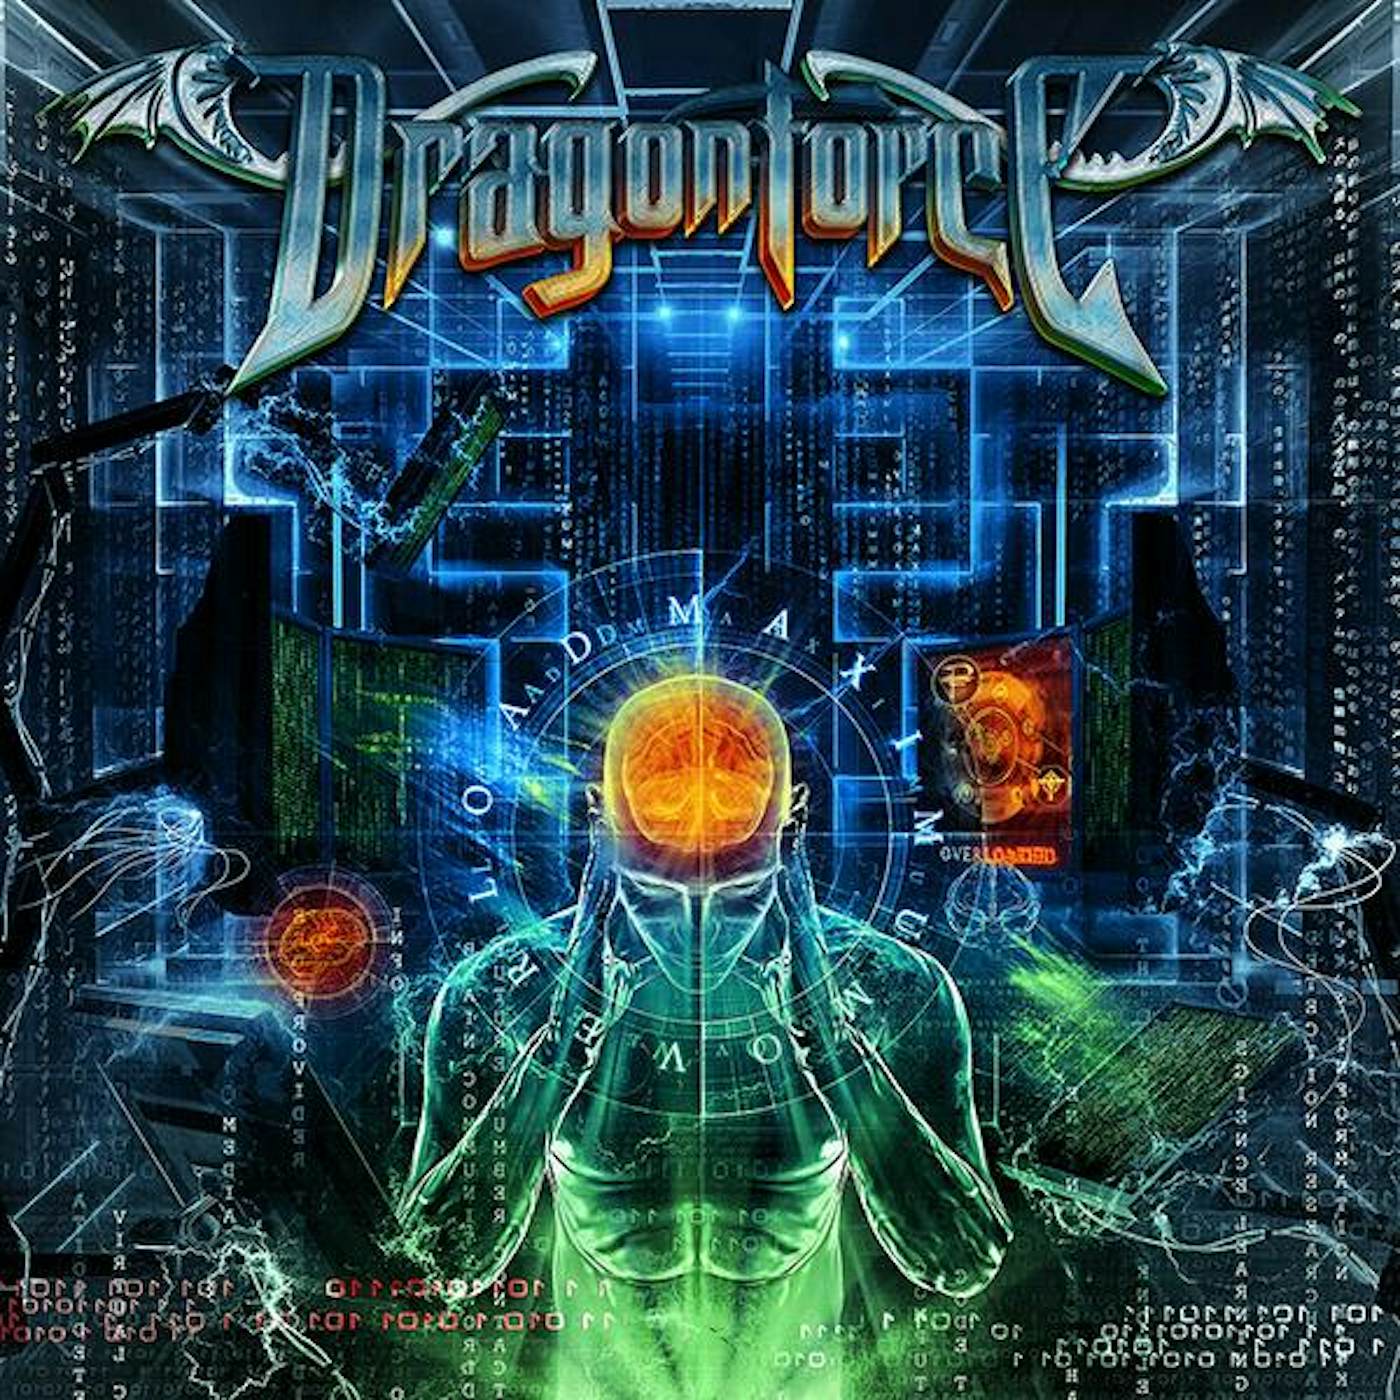 DragonForce "Maximum Overload (Special Edition)" CD/DVD